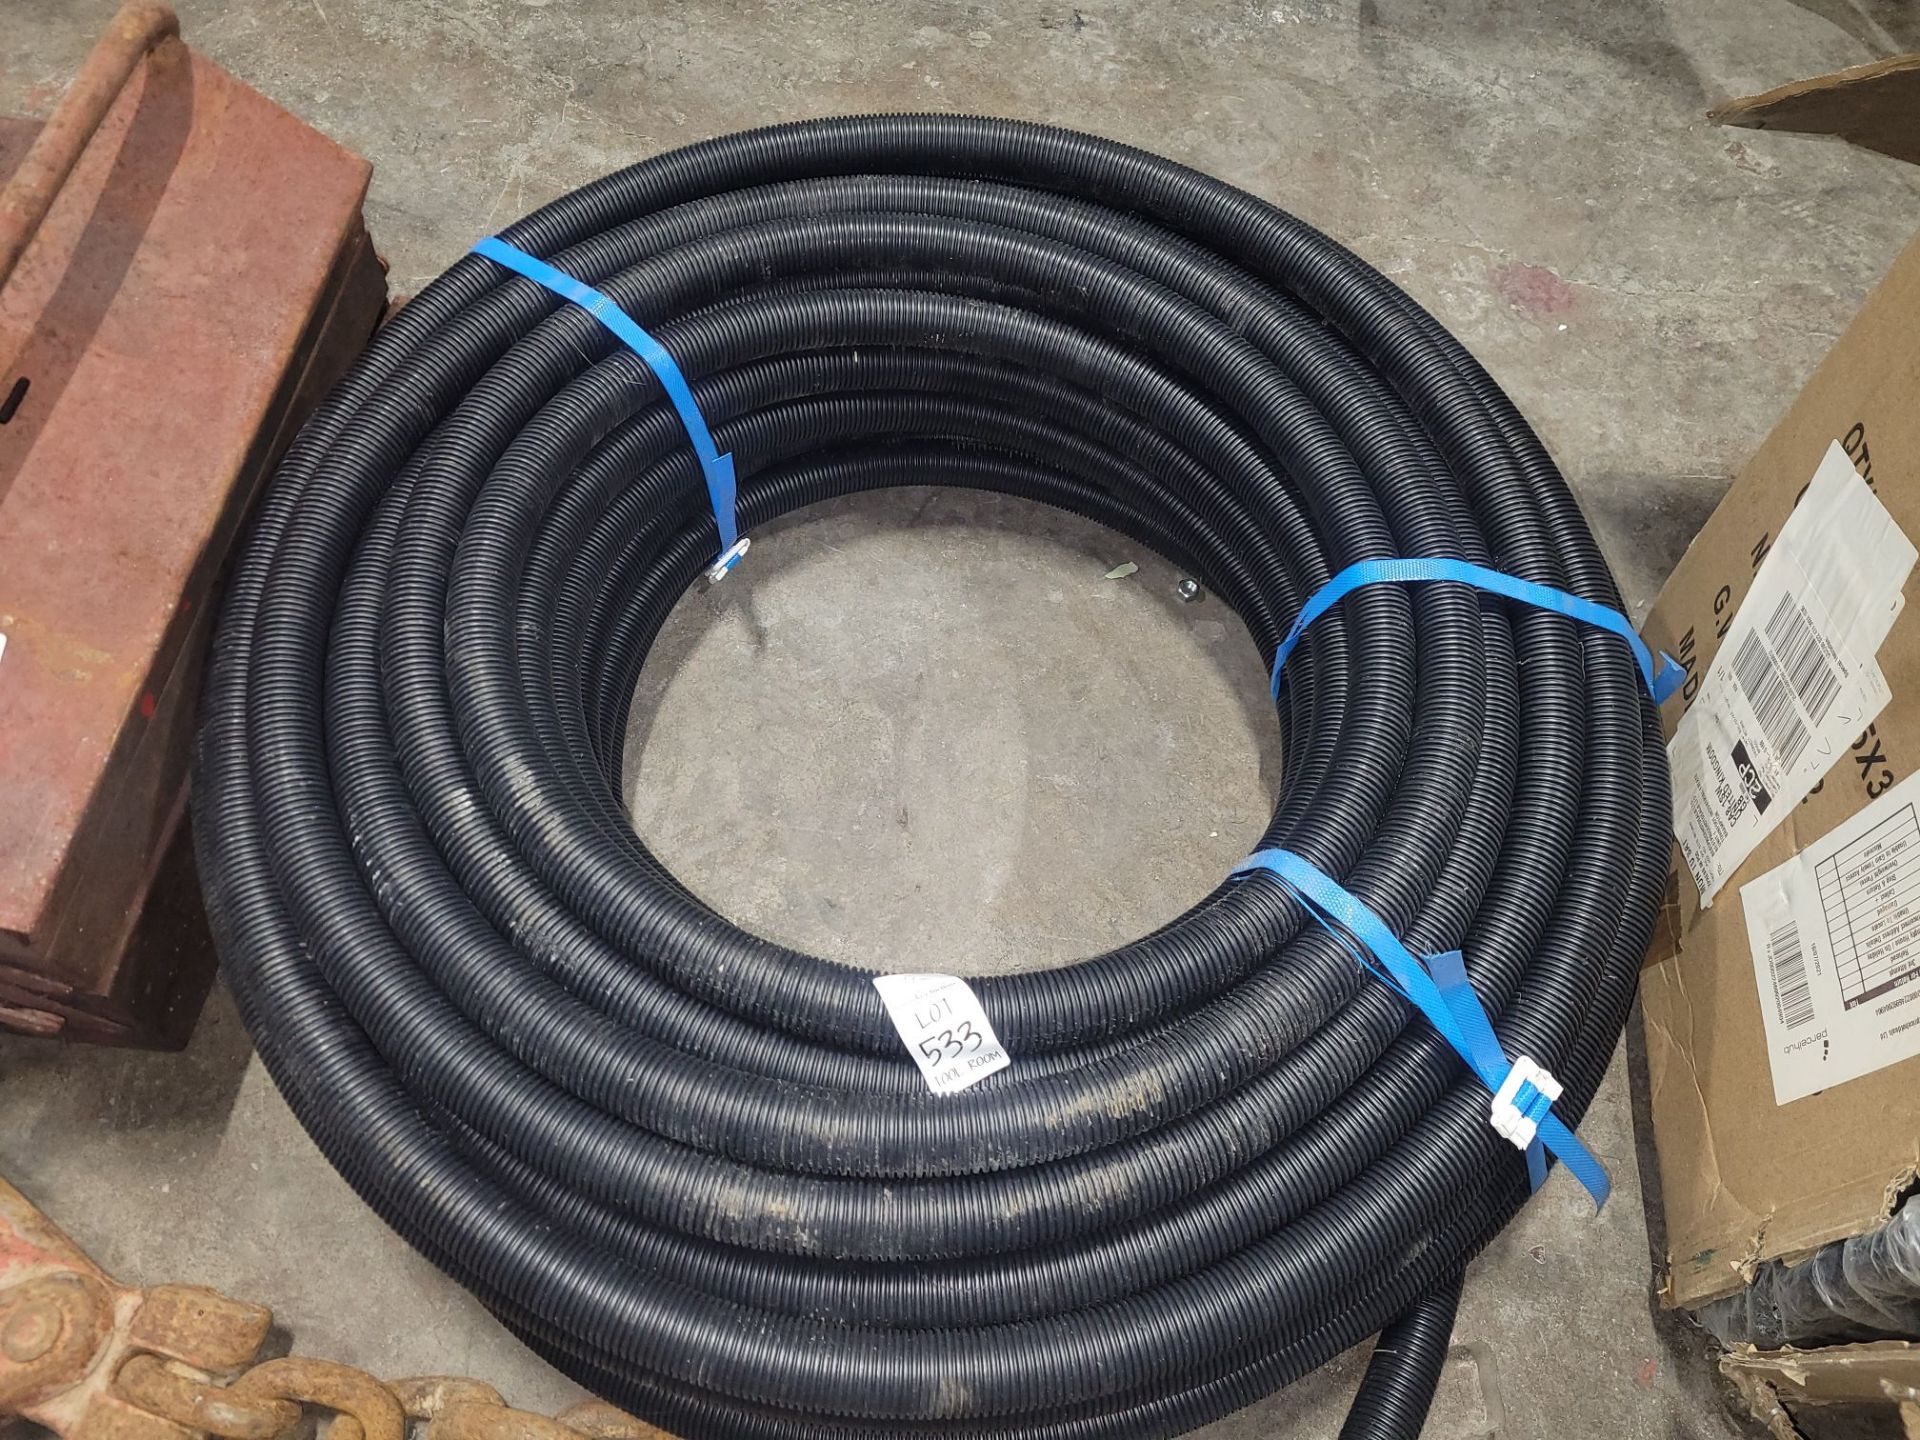 ROLL OF BLACK PLASTIC PIPING